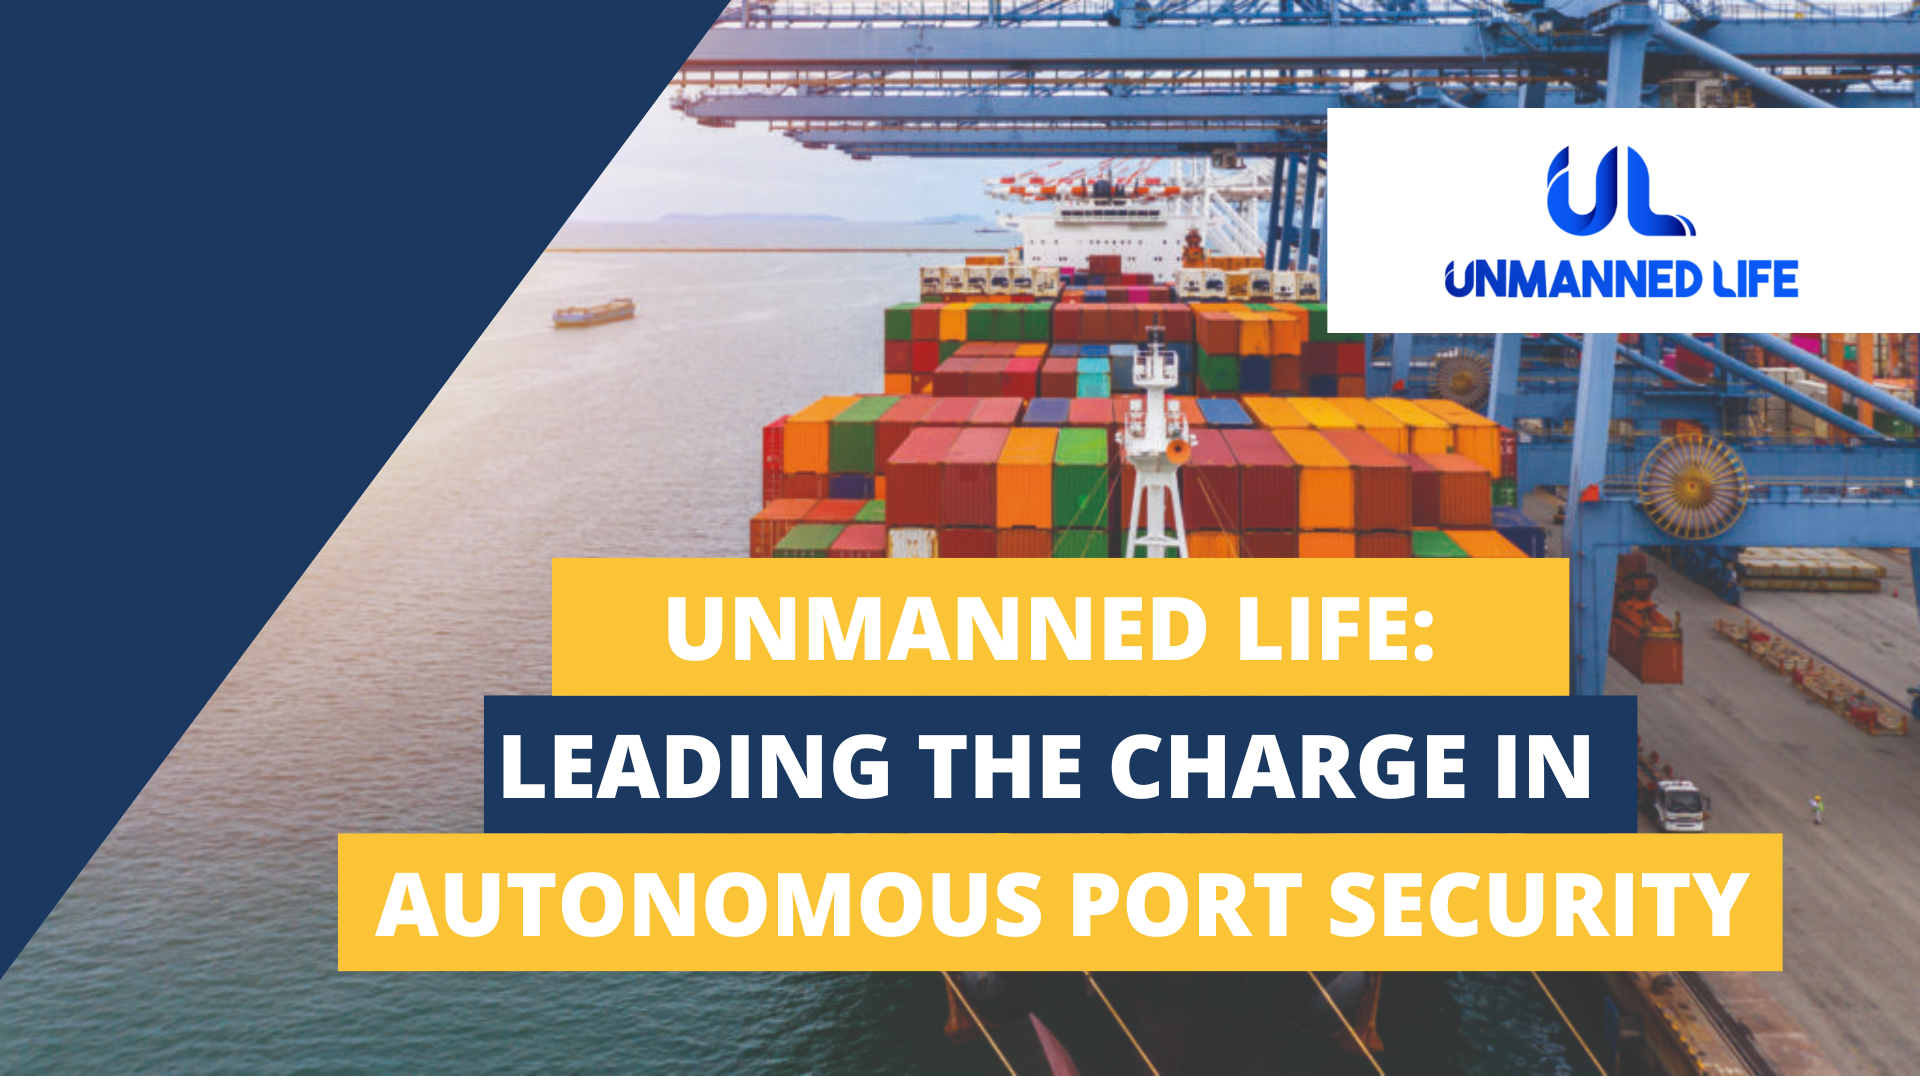 Unmanned Life Launches U-Security